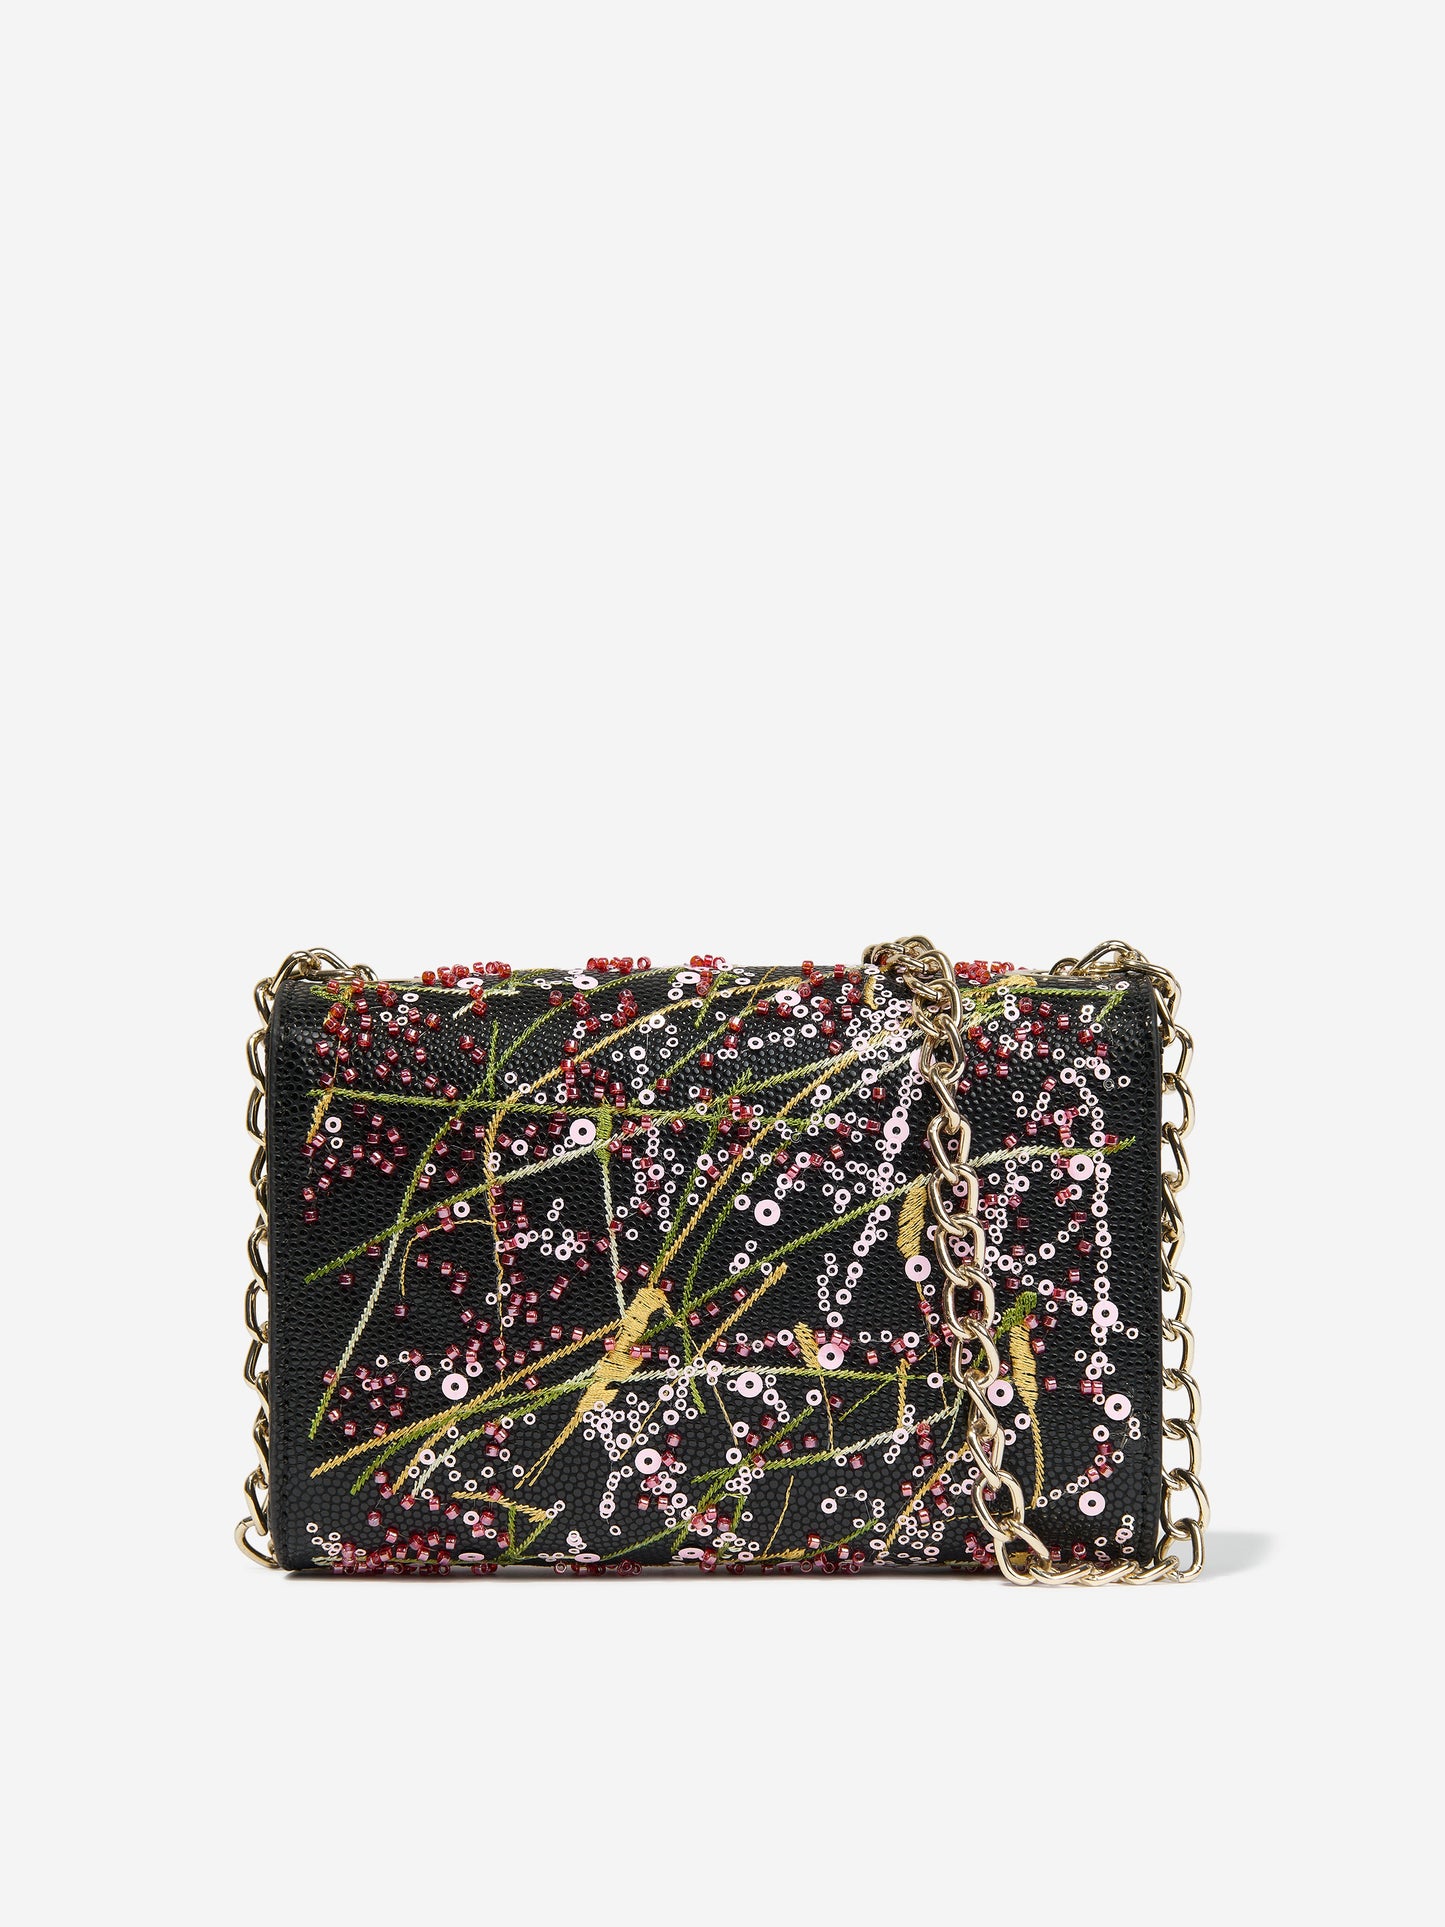 Divina Embroidery Flap Bag in Black